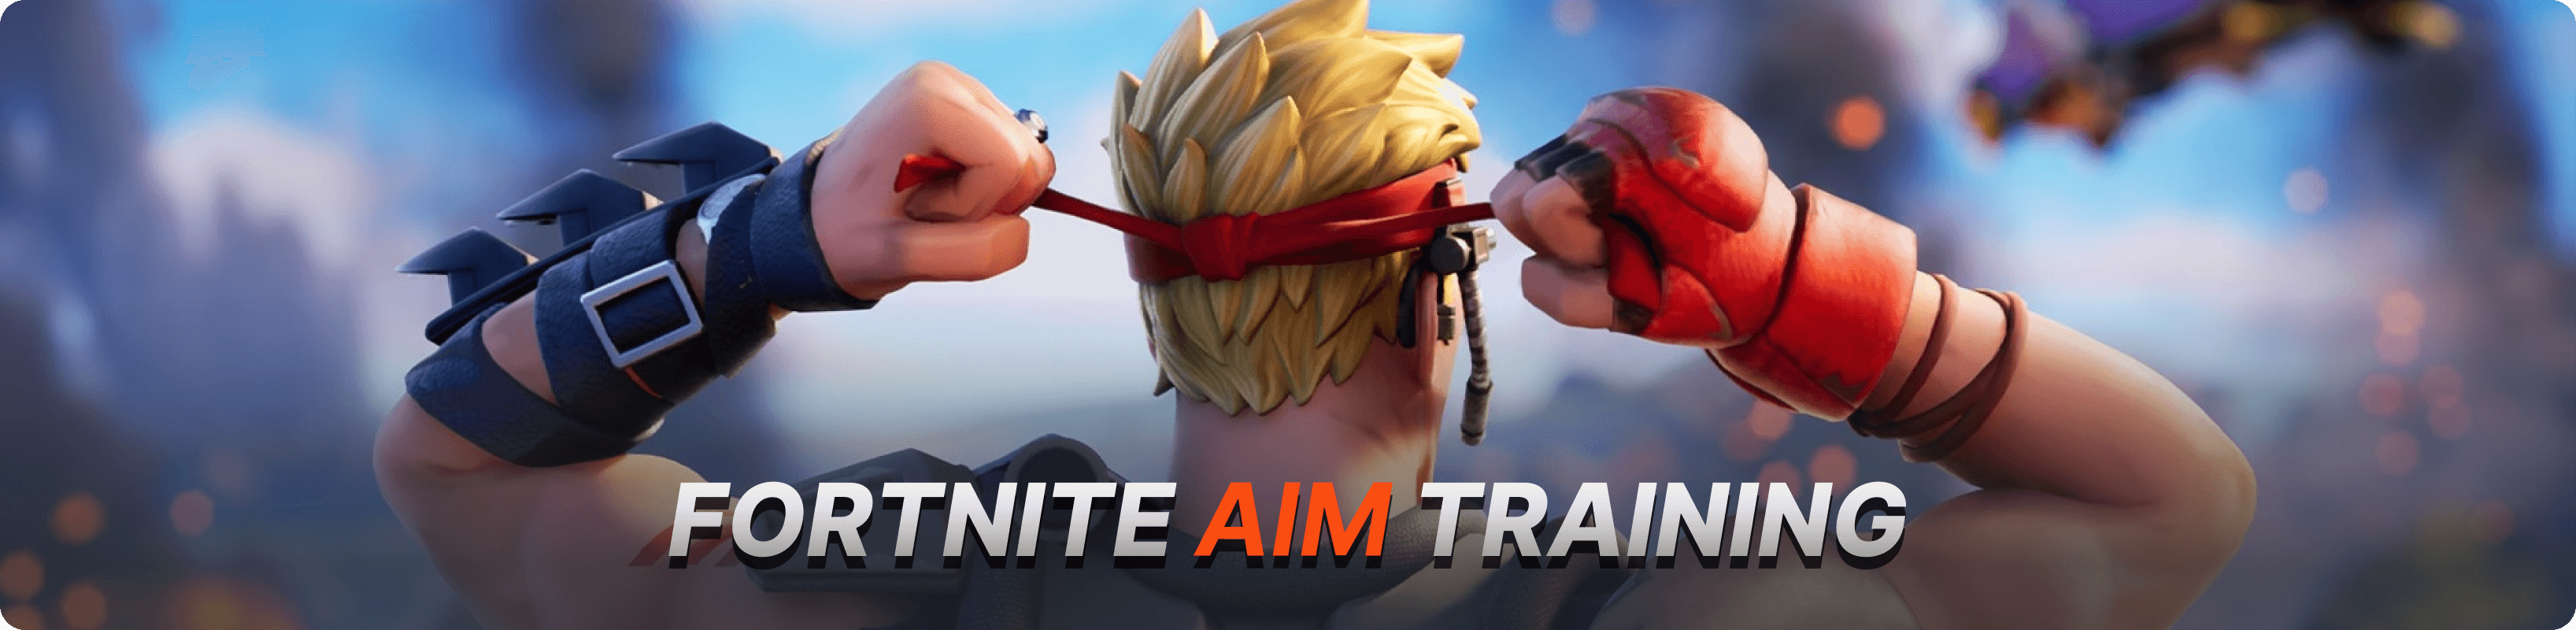 Fortnite Aim Trainer Guide - how to improve aim with instructions